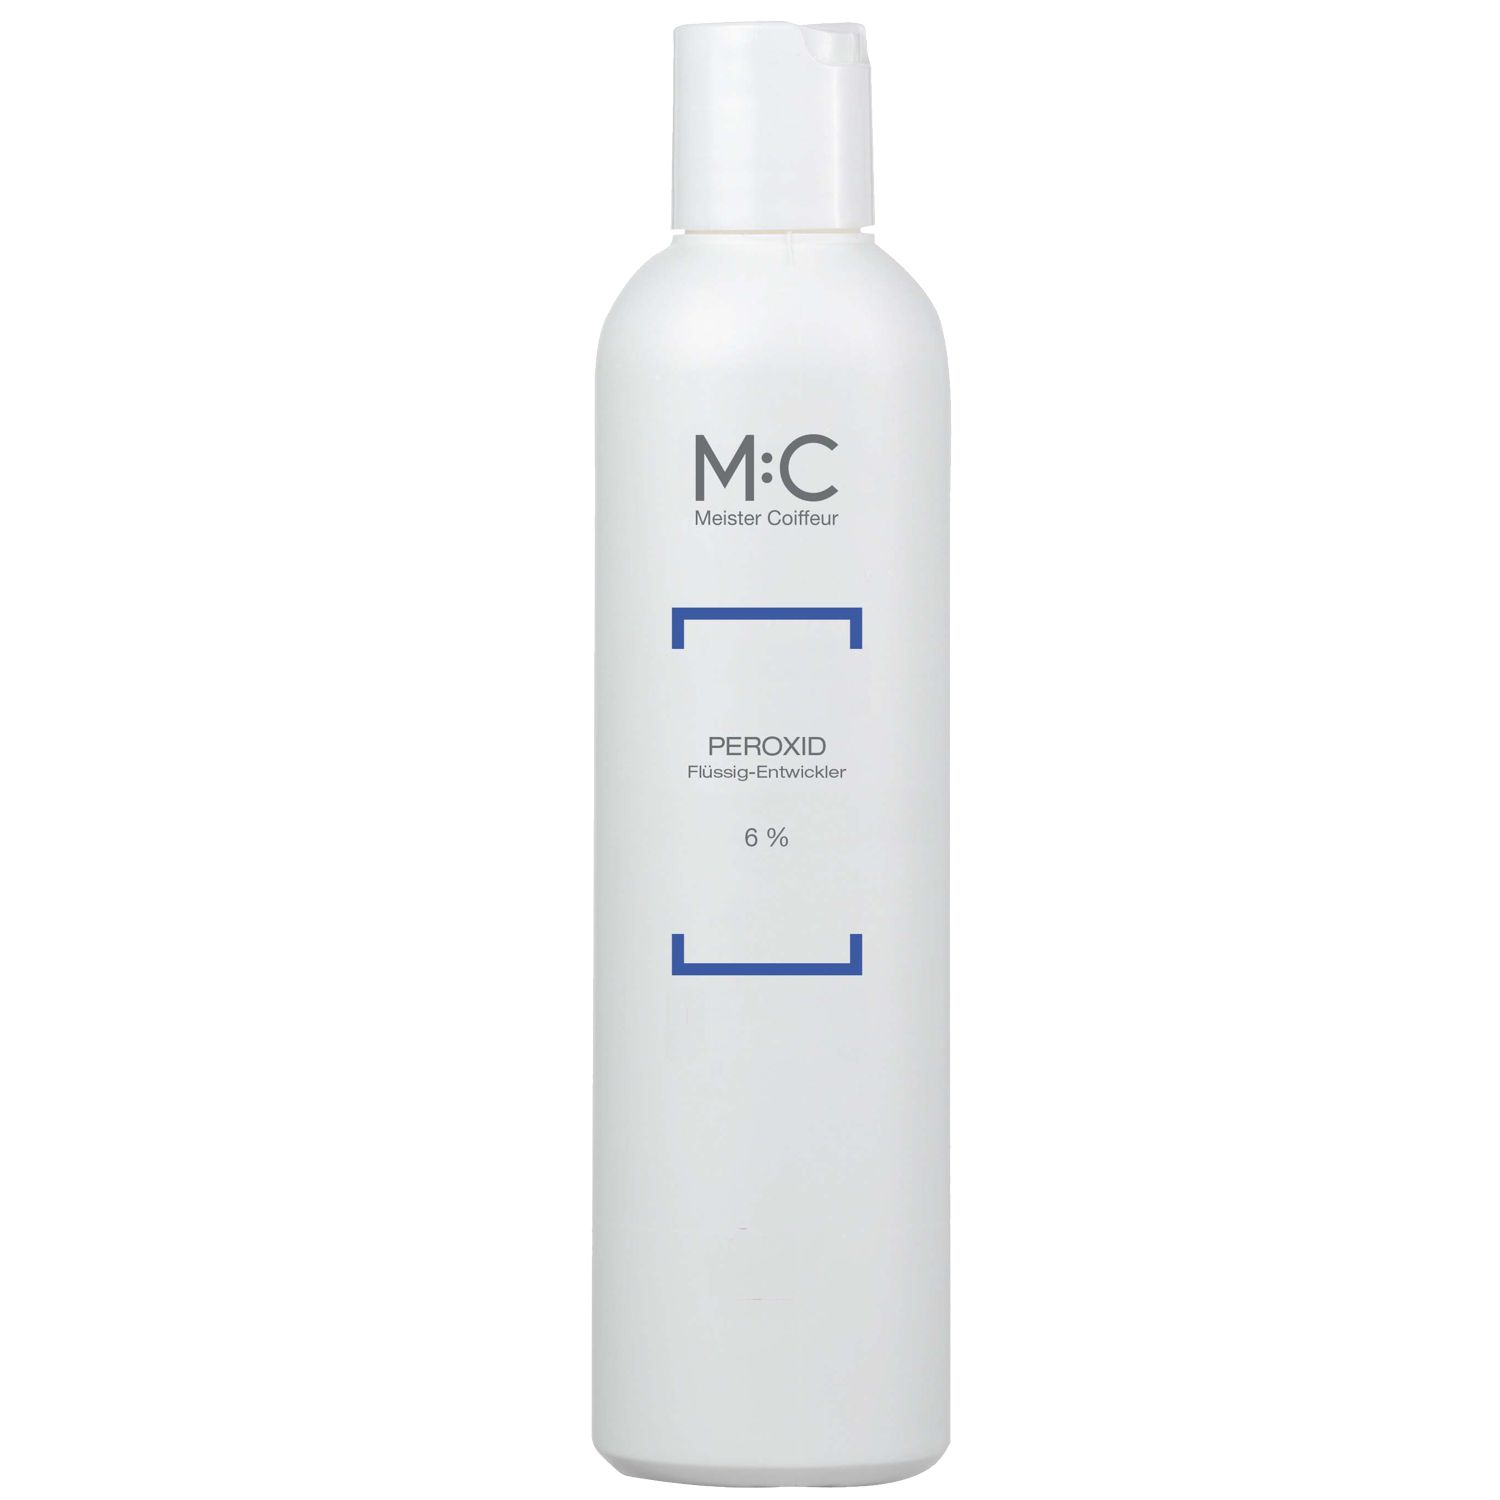 Meister Coiffeur M:C Peroxide 6 % C 250 ml